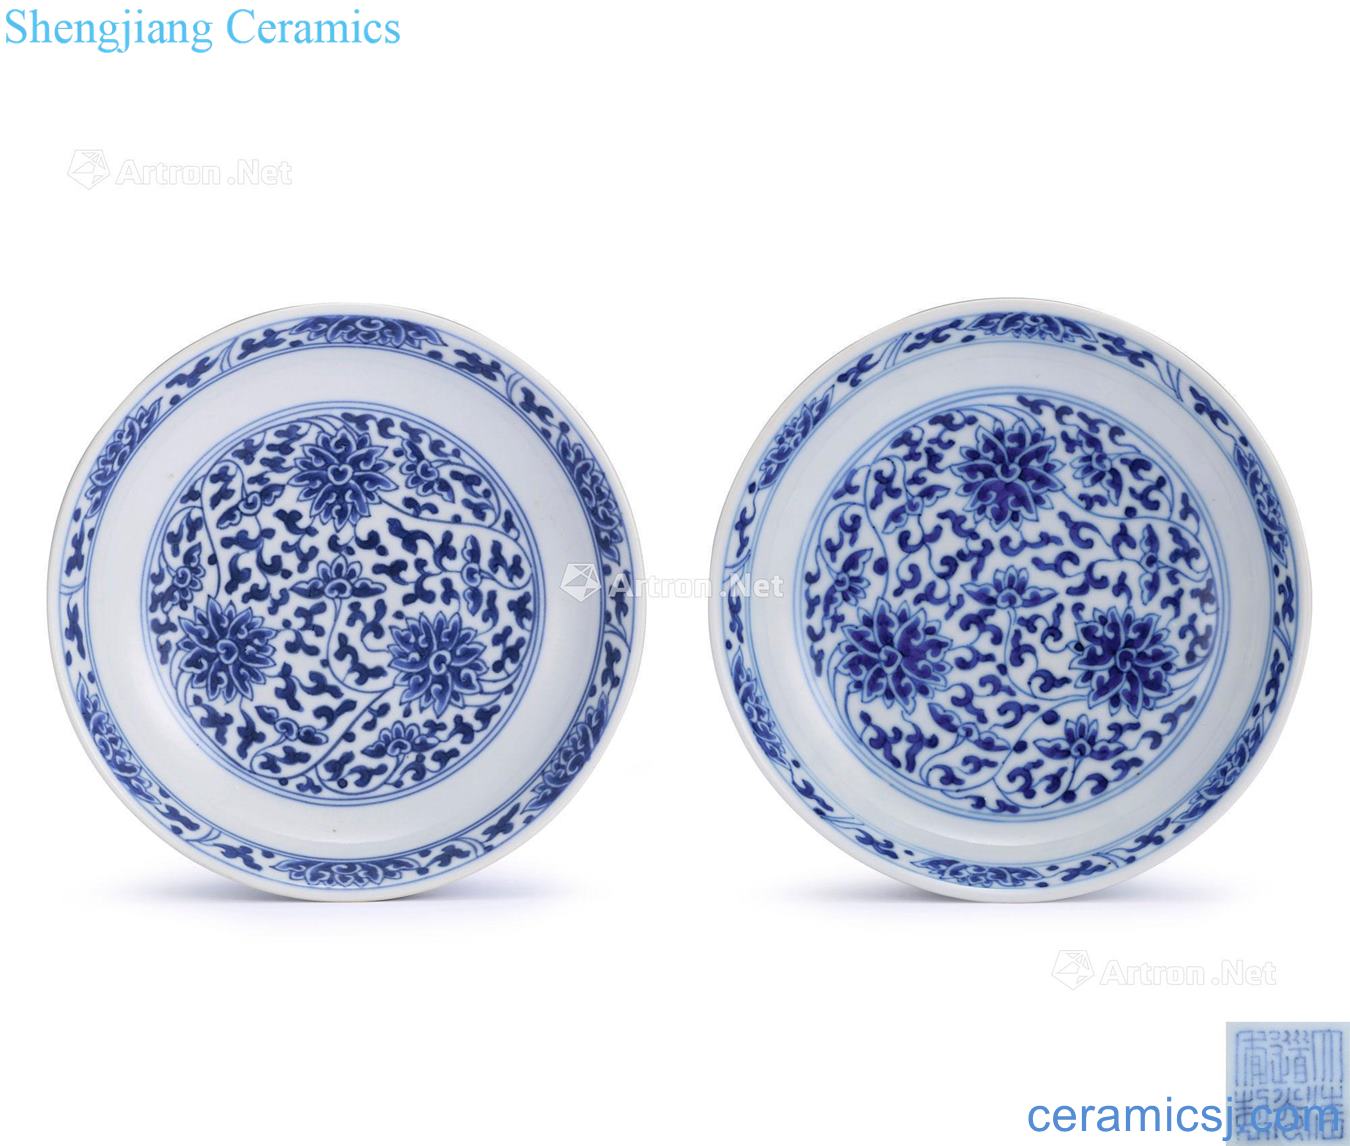 Qing daoguang Blue and white tie up lotus flower tray (two)